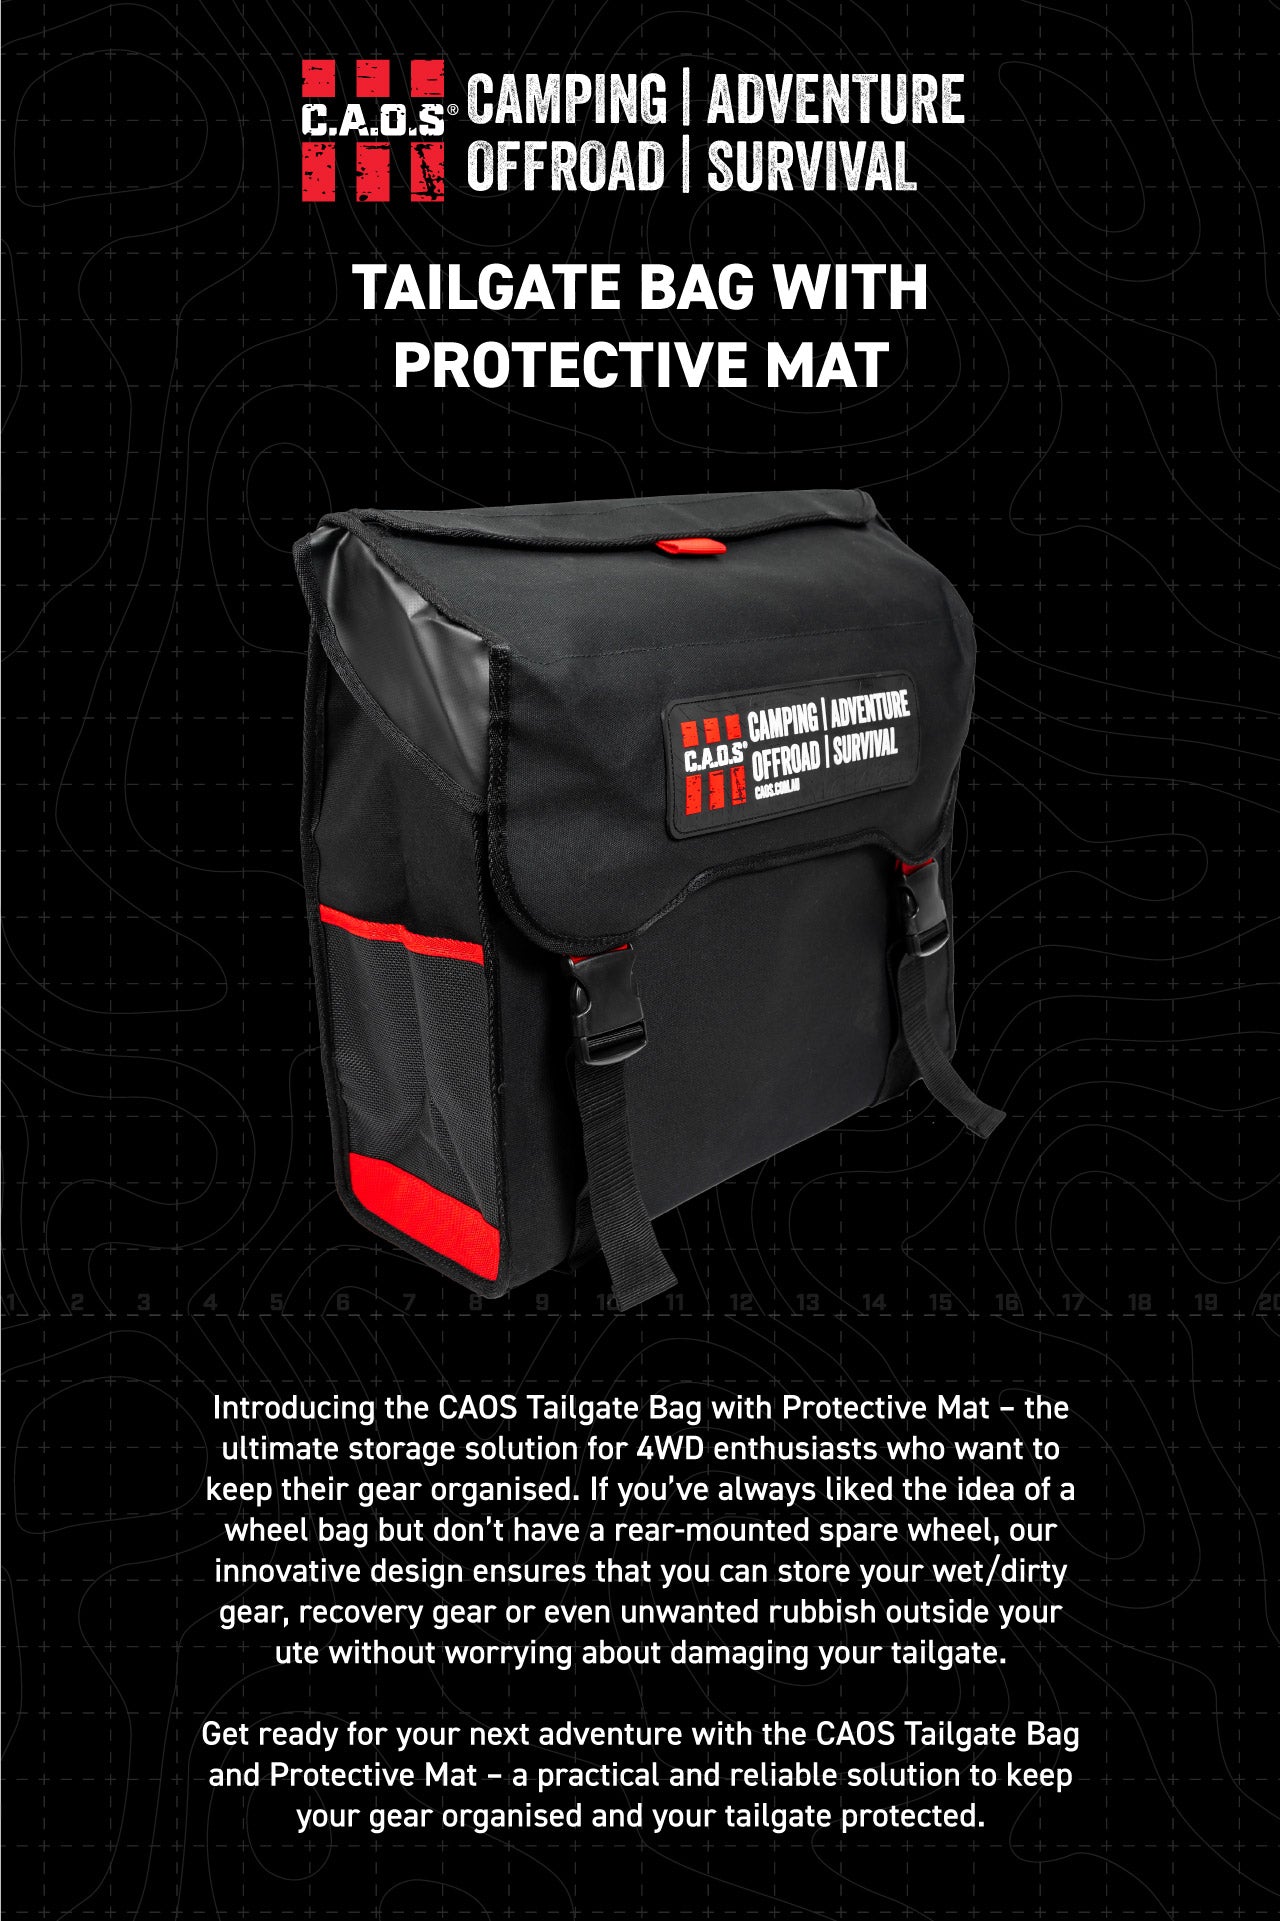 Introducing the CAOS Tailgate Bag with Protective Mat – the ultimate storage solution for 4WD enthusiasts who want to keep their gear organised. If you’ve always liked the idea of a wheel bag but don’t have a rear-mounted spare wheel, our innovative design ensures that you can store your wet/dirty gear, recovery gear or even unwanted rubbish outside your ute without worrying about damaging your tailgate.  Get ready for your next adventure with the CAOS Tailgate Bag and Protective Mat – a practical and relia